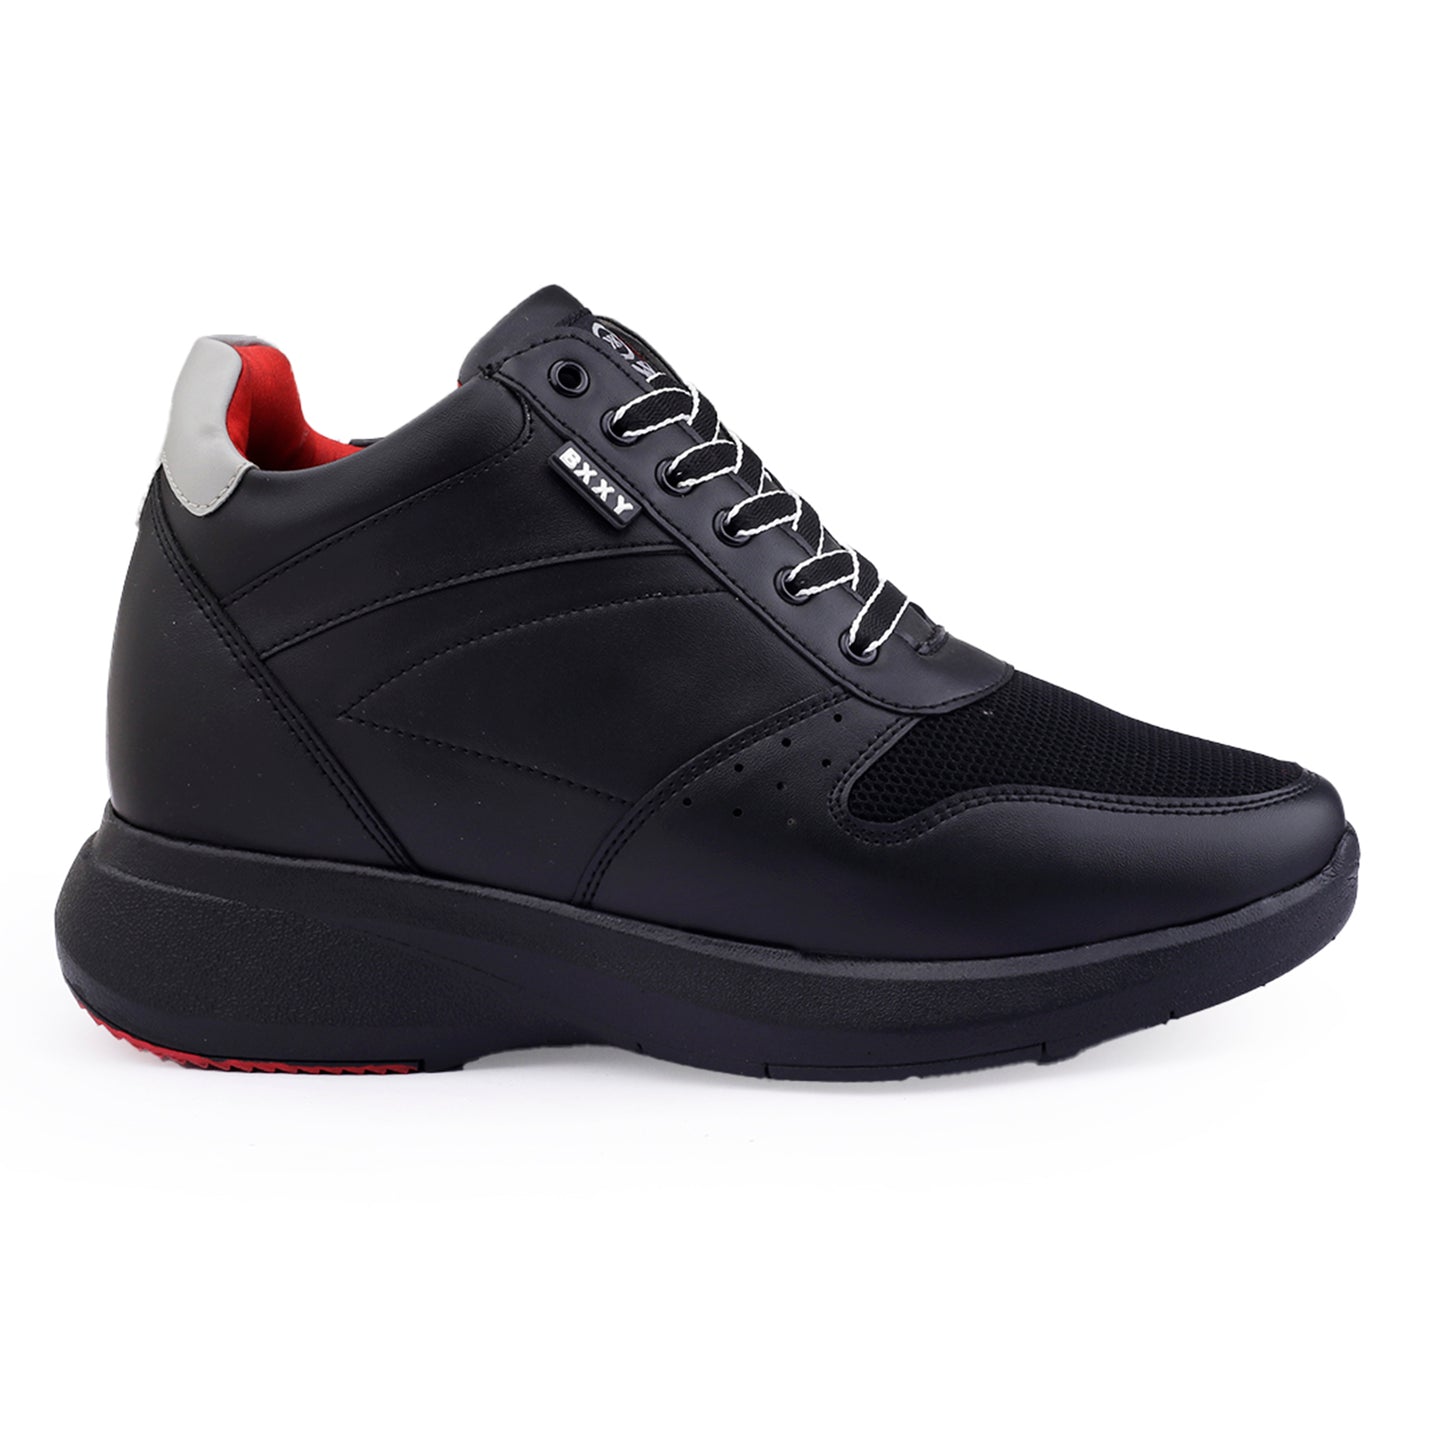 Bxxy Men's Latest Hidden Height Increasing Faux Leather Material Casual Lace-up Outdoor Sneaker Boot